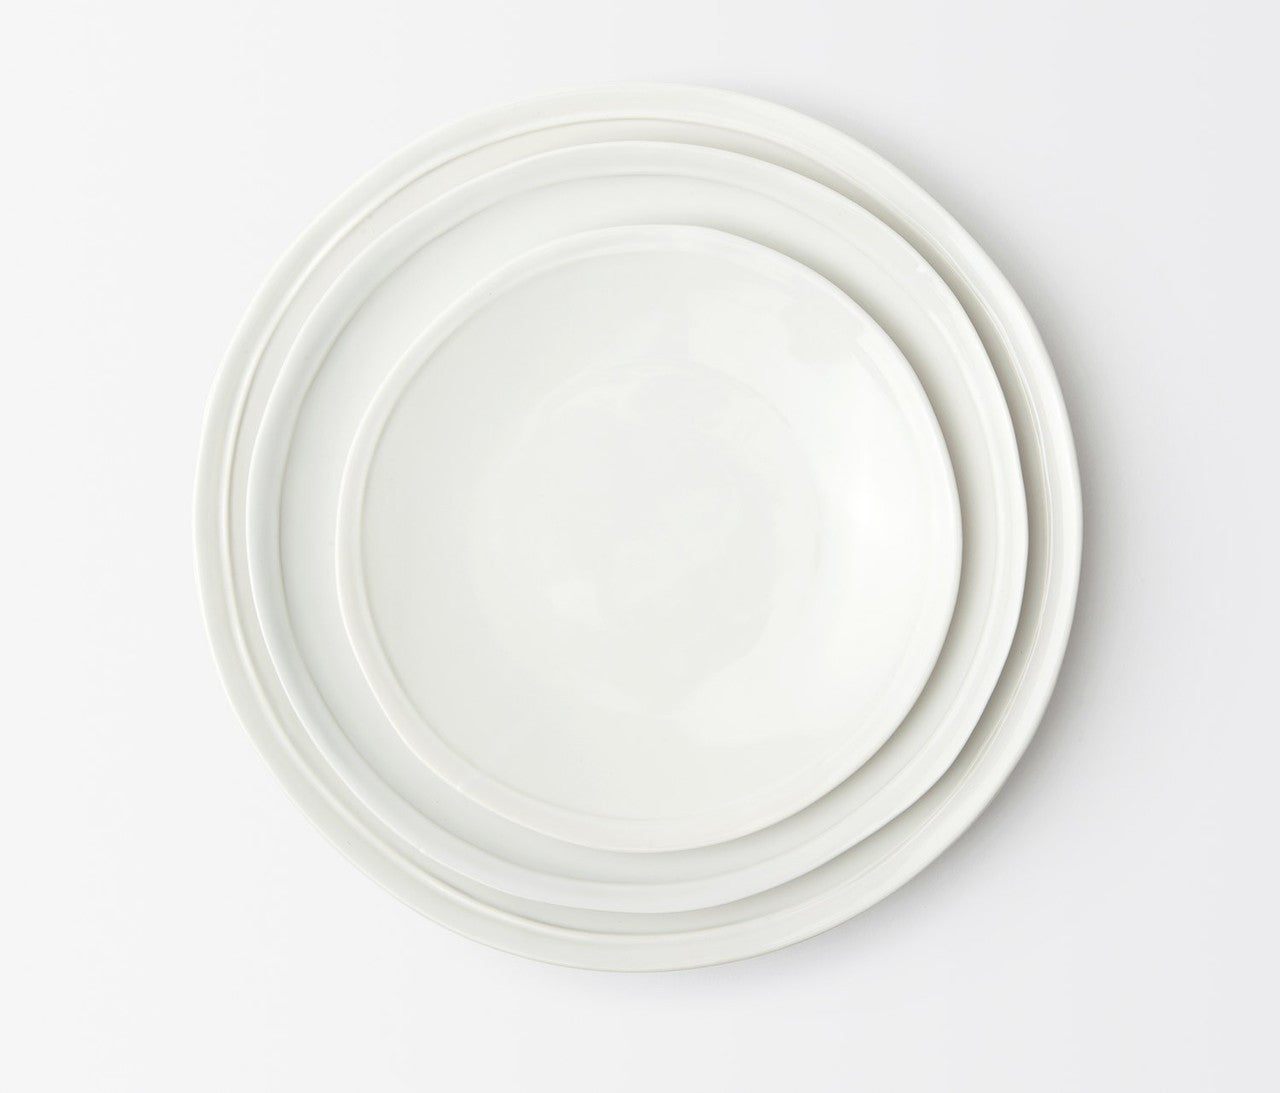 Ariana White Salad Plate - RSVP Style